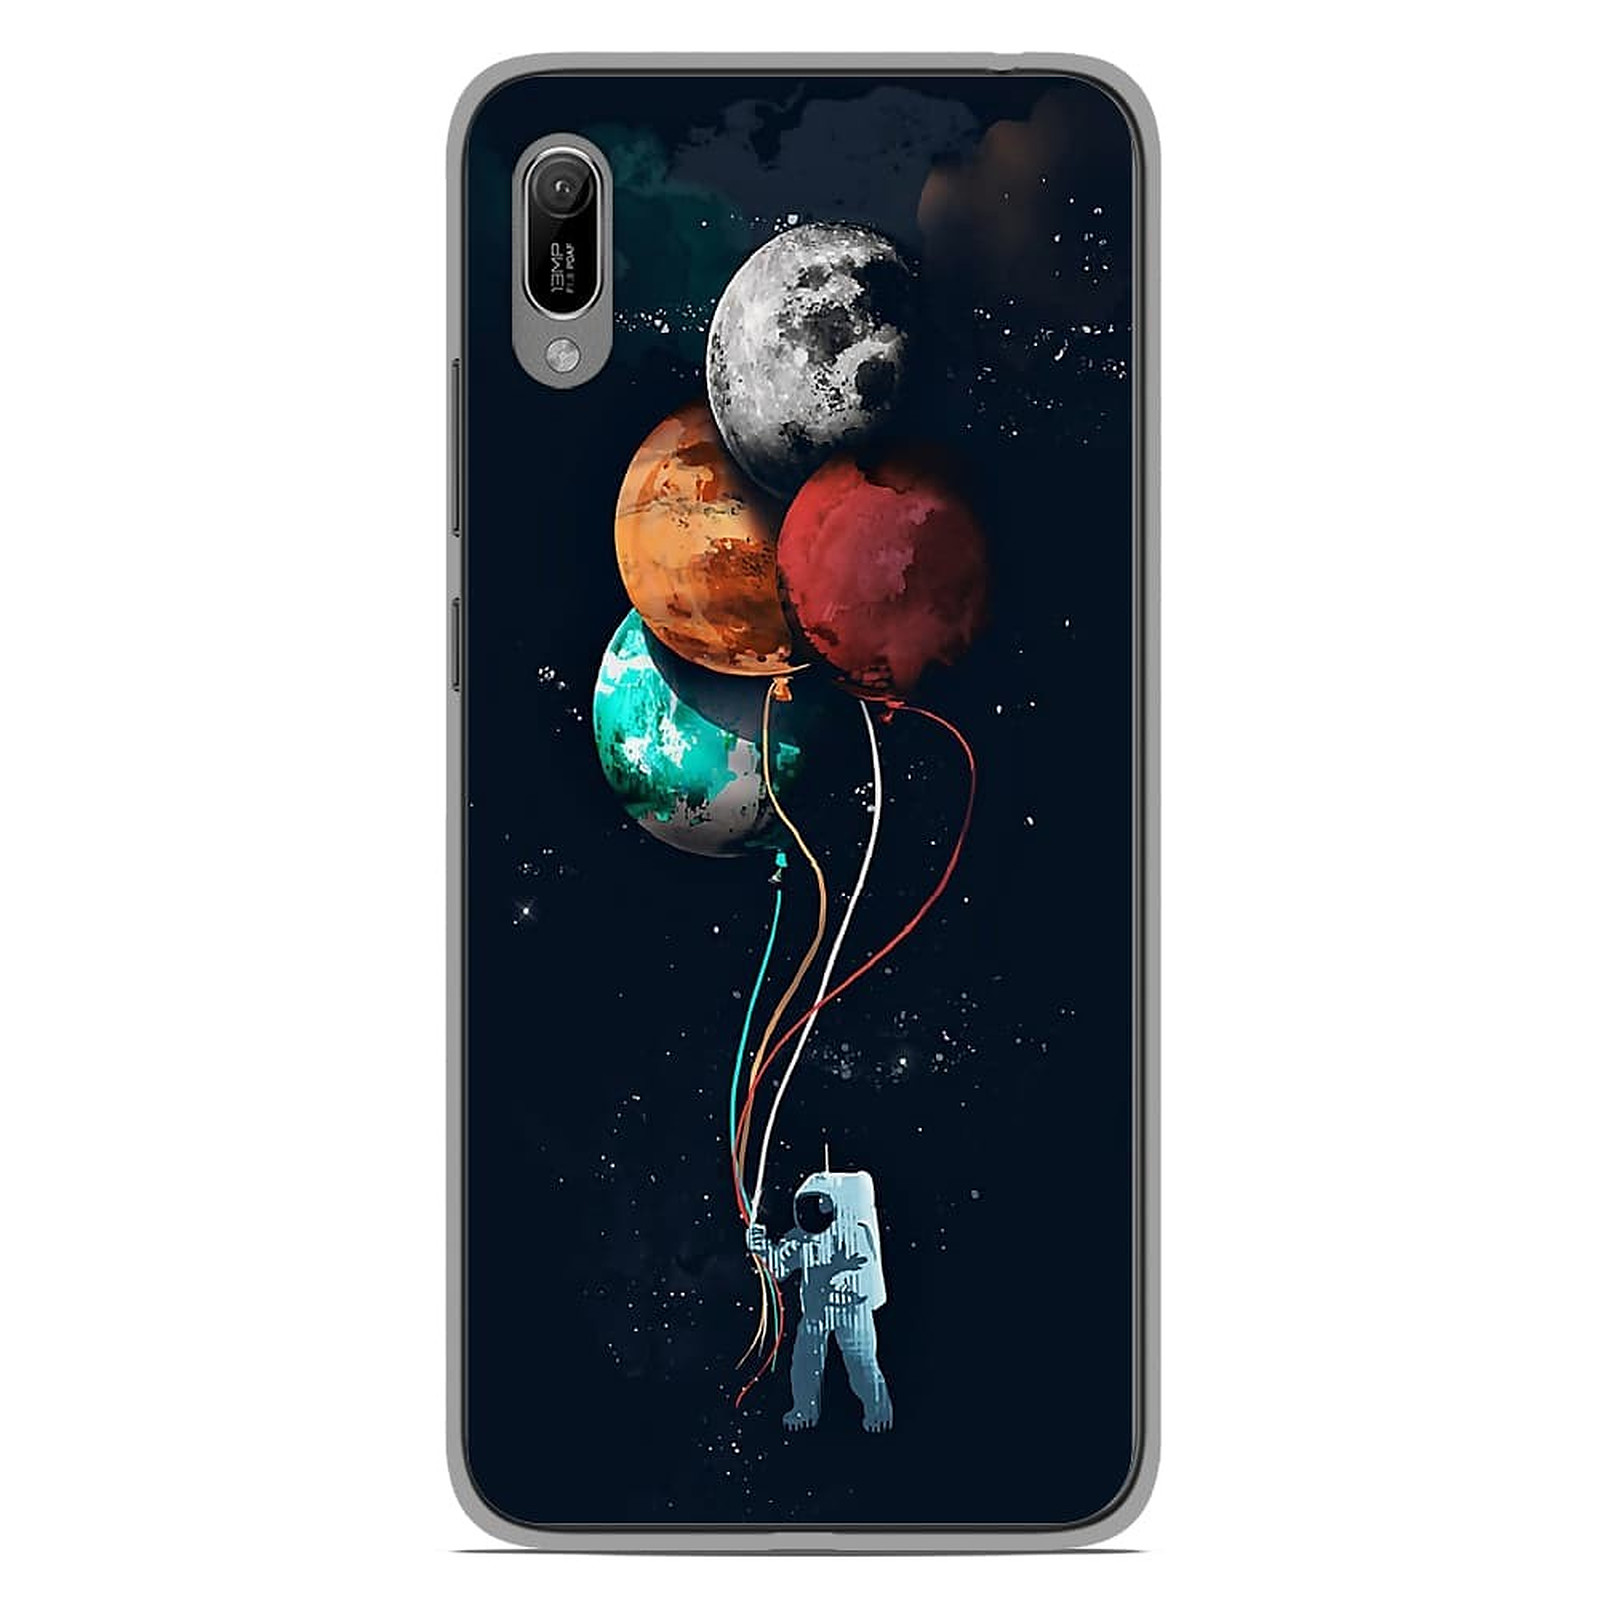 1001 Coques Coque silicone gel Huawei Y6 2019 motif Cosmonaute aux Ballons - Coque telephone 1001Coques